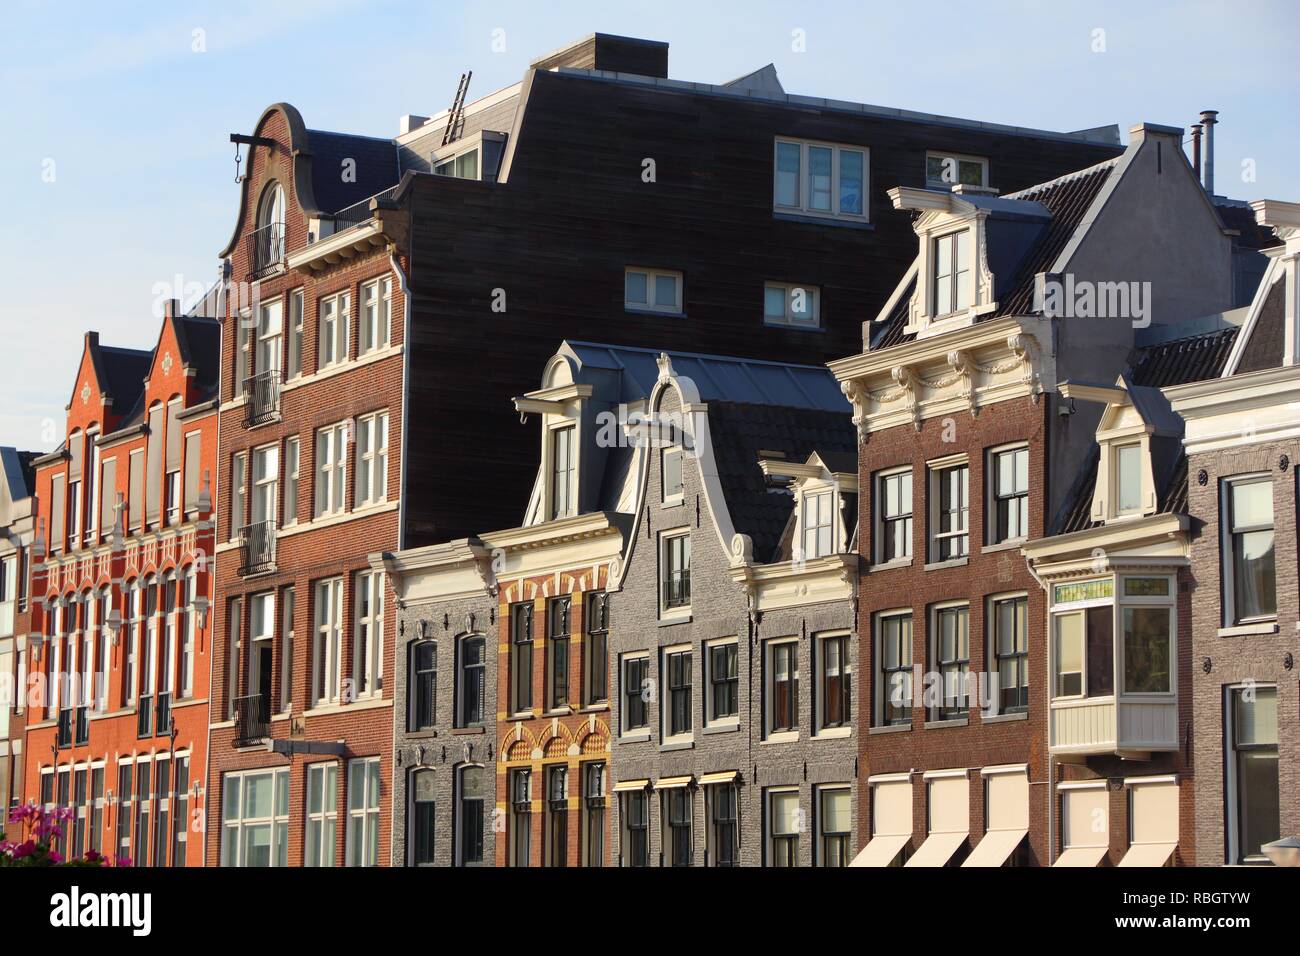 Amsterdam city architecture - Prinsengracht residential buildings. Netherlands rowhouse. Stock Photo